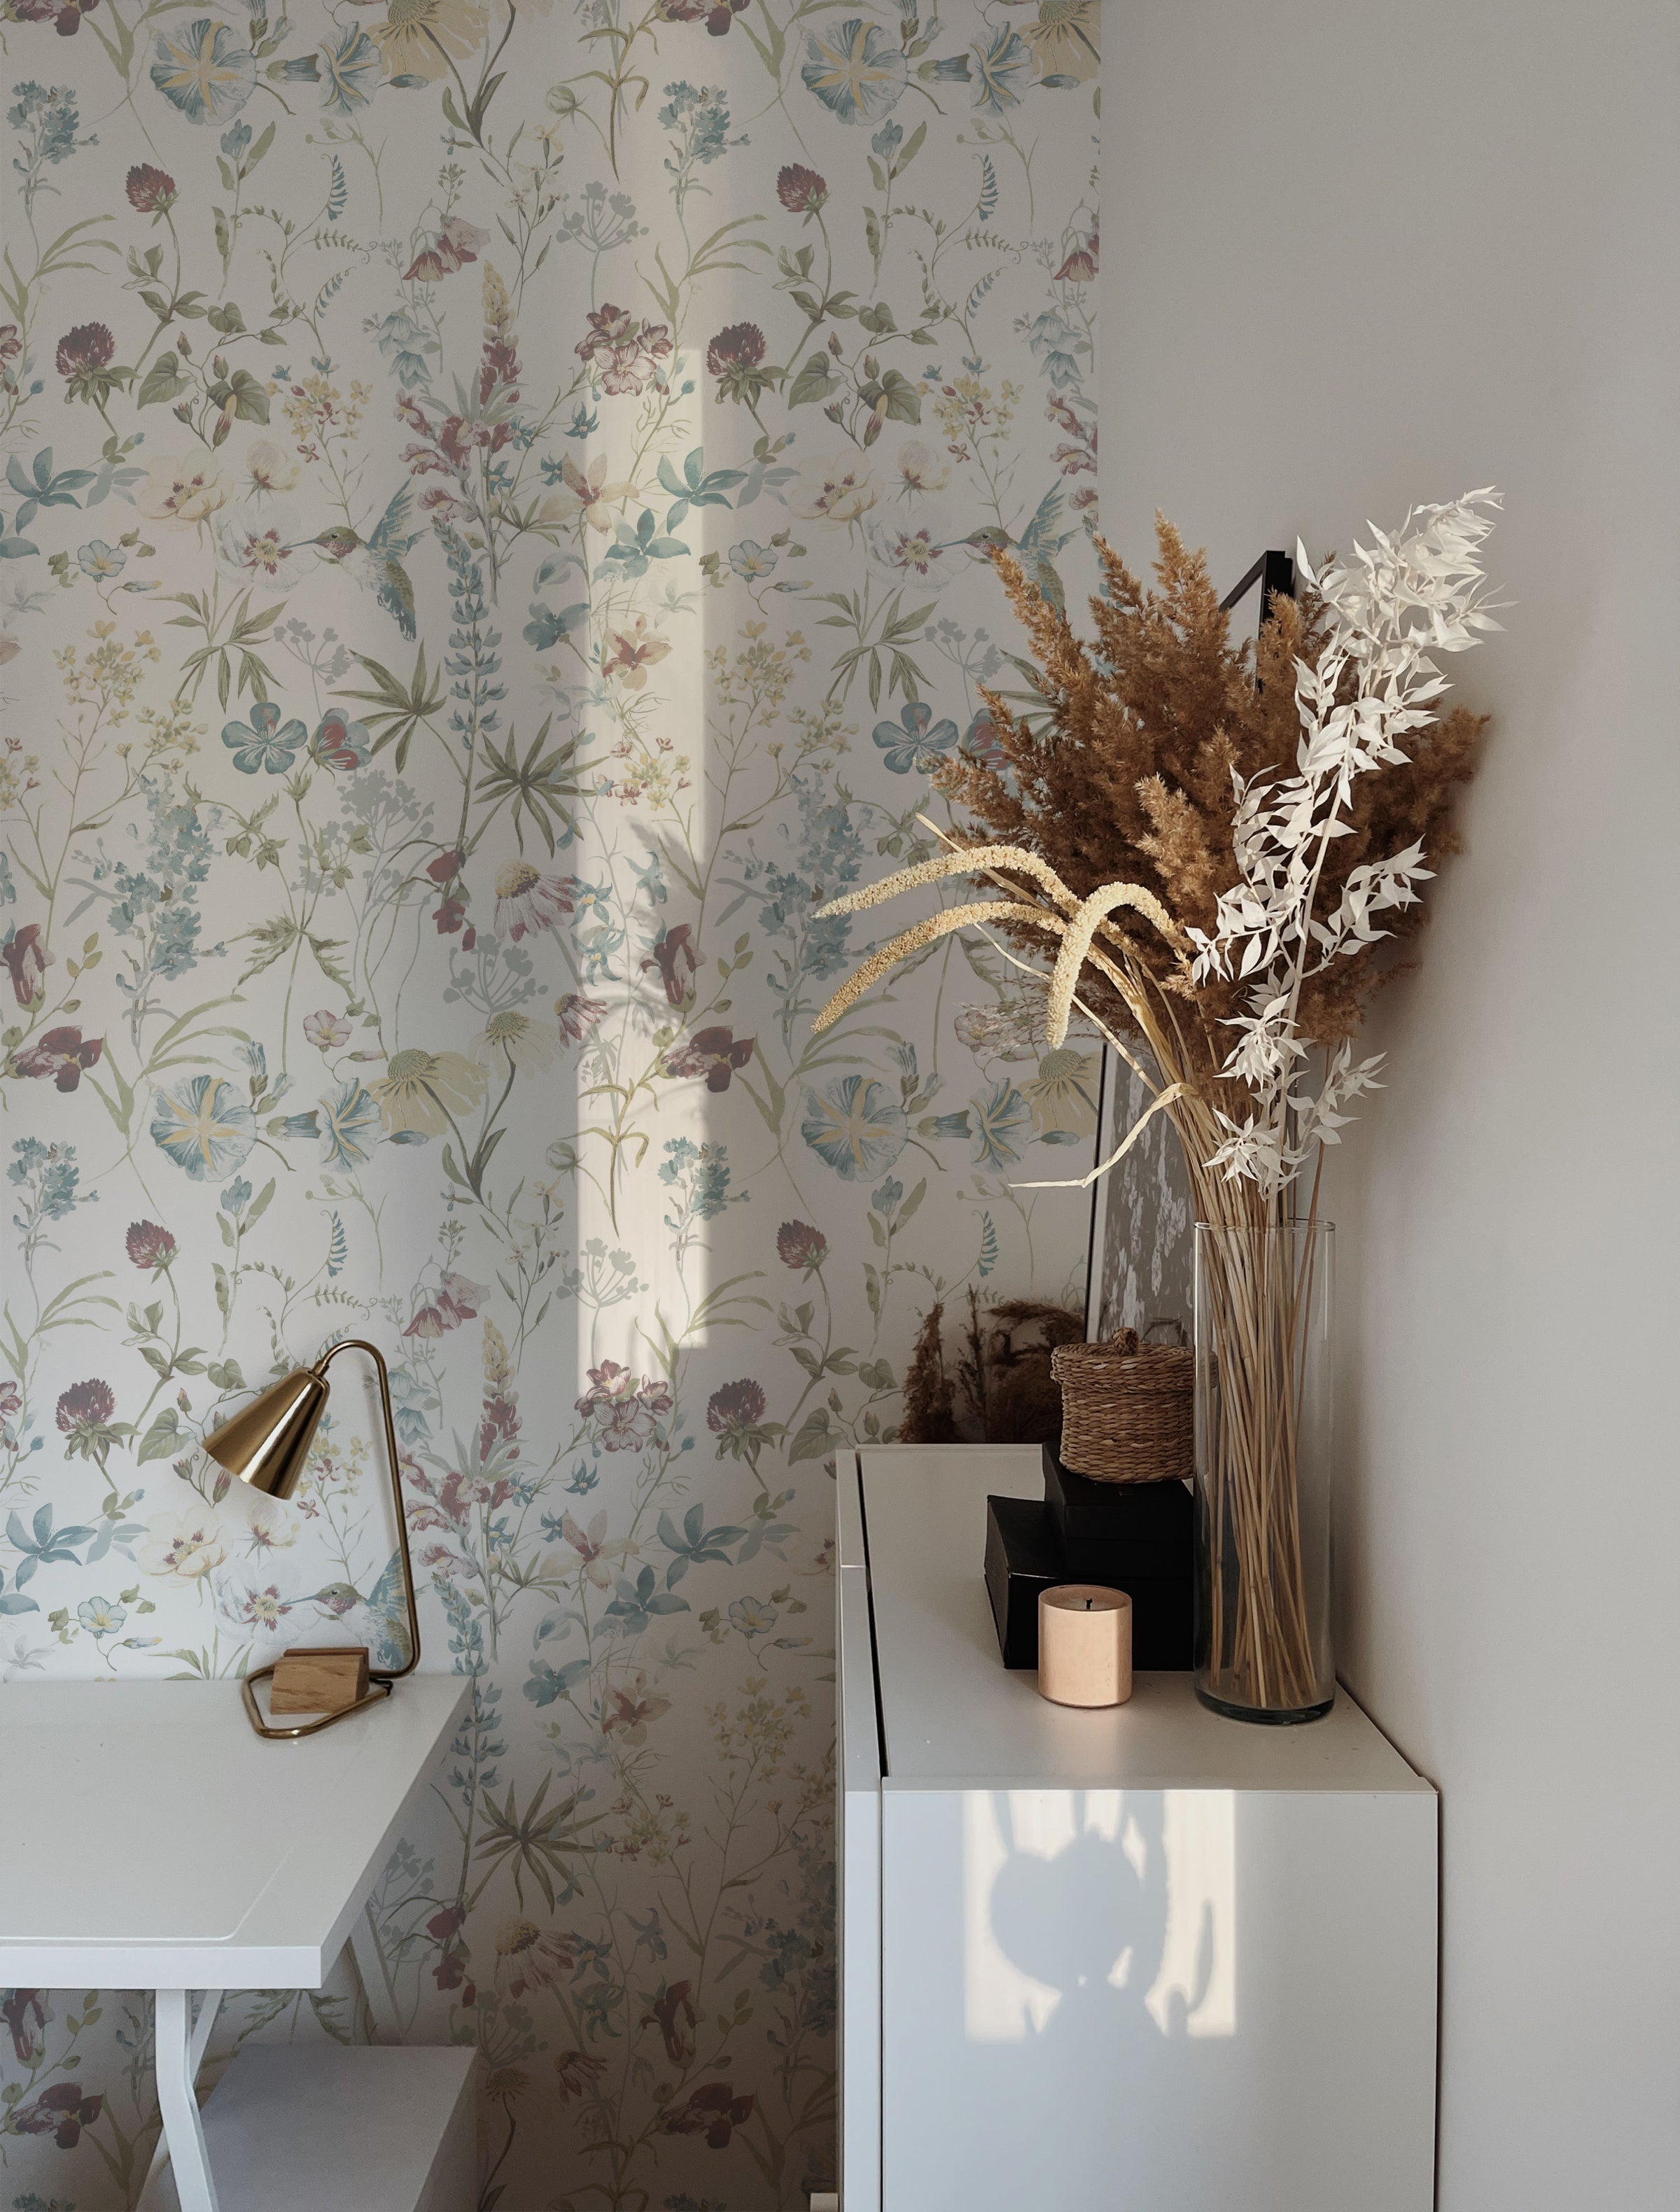 A serene home office corner featuring the Soft Feathered Blooms Wallpaper, which displays a delicate and airy botanical print with flowers and leaves in soft pastel shades of blue, pink, and green on a light background. This wallpaper adds a touch of spring freshness to the room, complemented by natural wood furniture and dried floral arrangements.